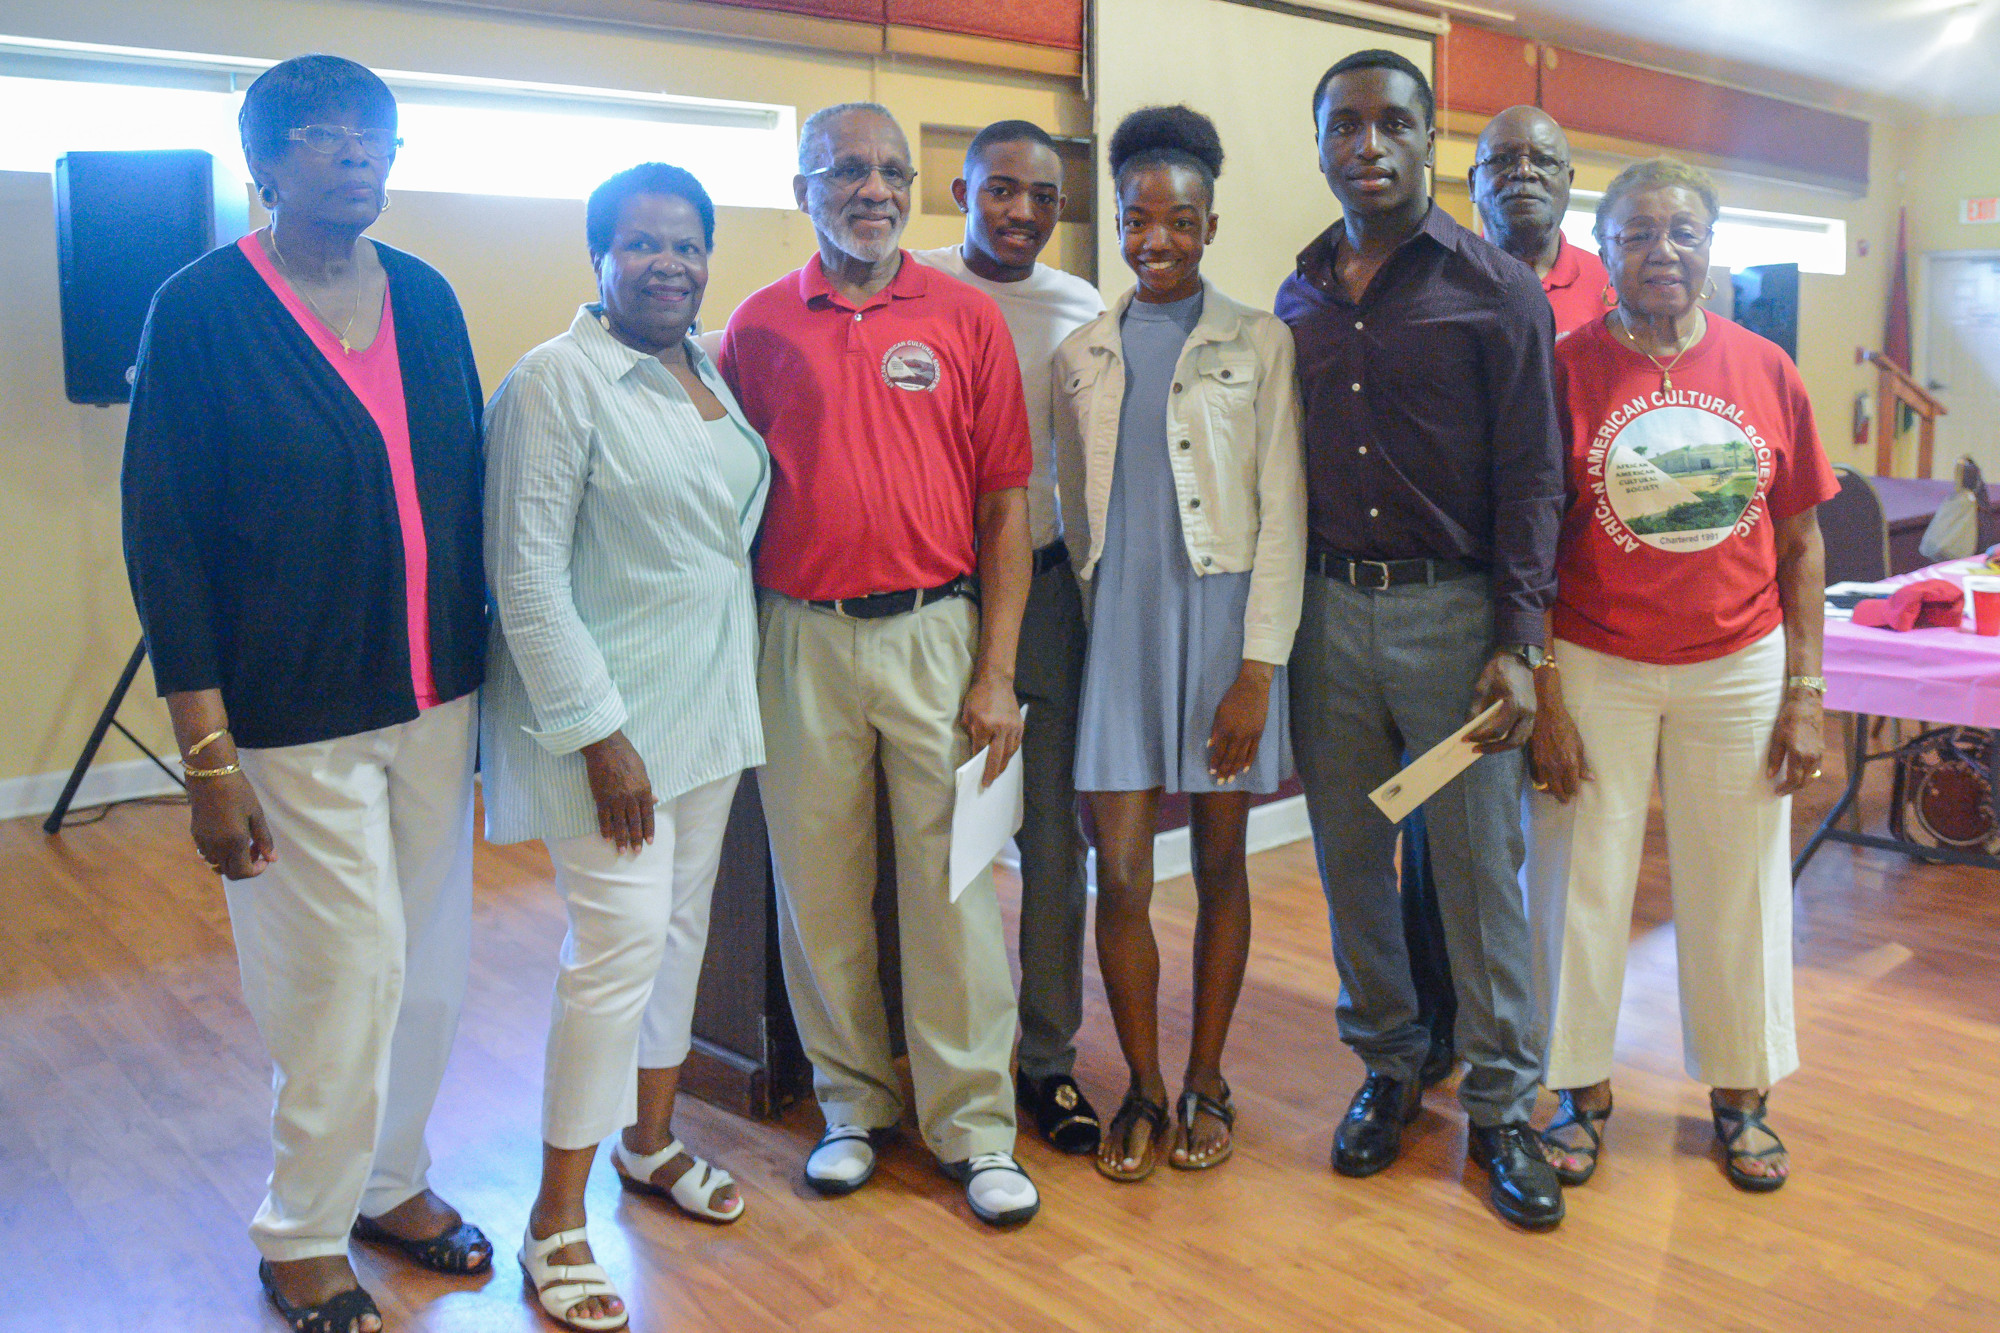 AACS members Elline Koonce, Harriett Whiting and Richard Barnes; scholarship recipients Darryl Boyer, Namiah Simpson an Donald Bryant; and AACS members Joseph Matthews and Jeanette Wheeler. Photo by Paige Wilson